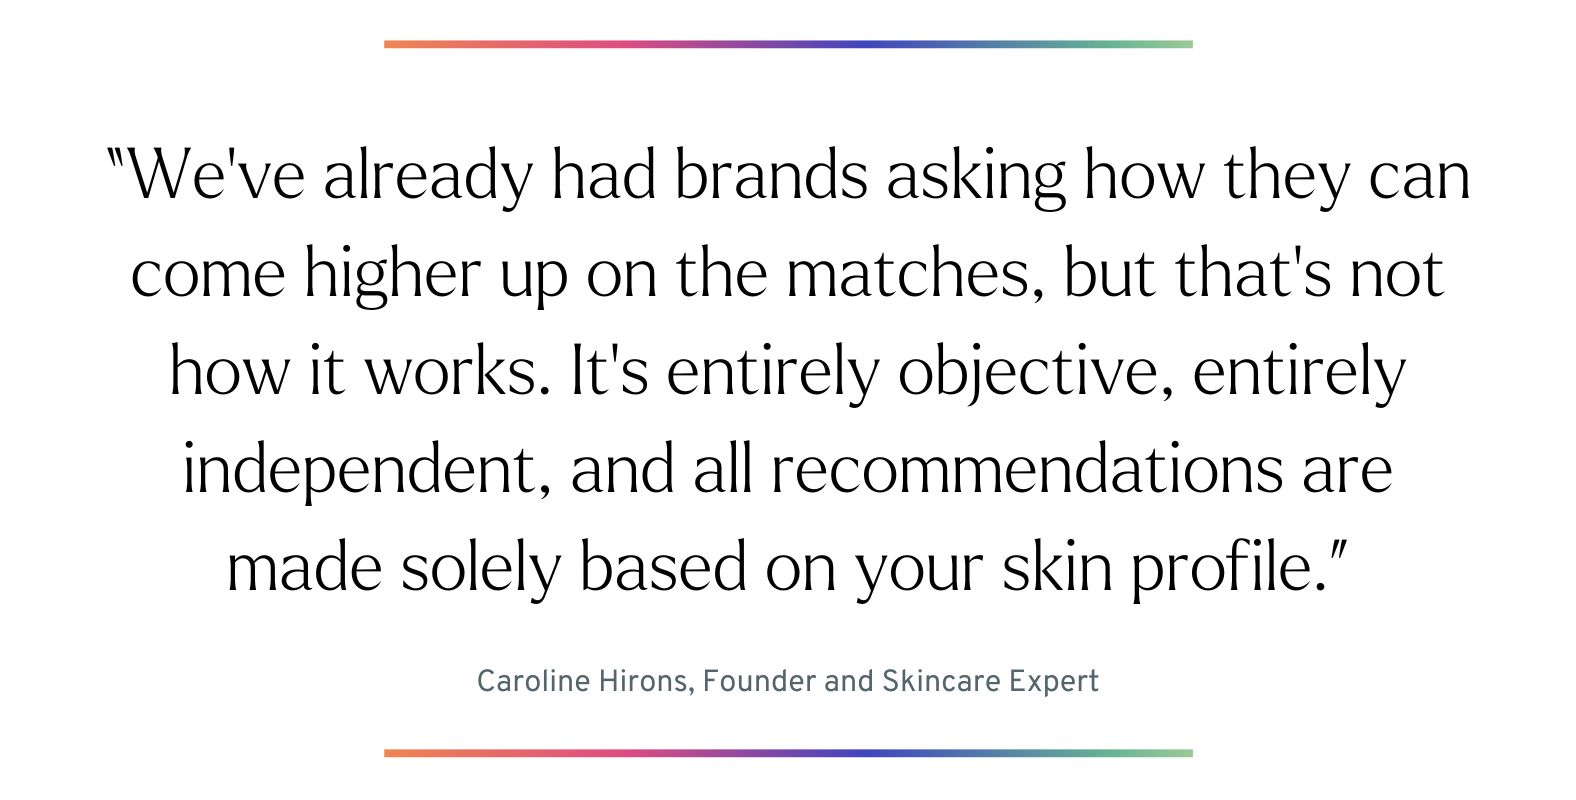 Quote: “We’ve already had brands asking how they can come higher up on the matches, but that’s not how it works. It’s entirely objective, entirely independent, and all recommendations are made solely based on your skin profile.” - Caroline Hirons, Founder and Skincare Expert